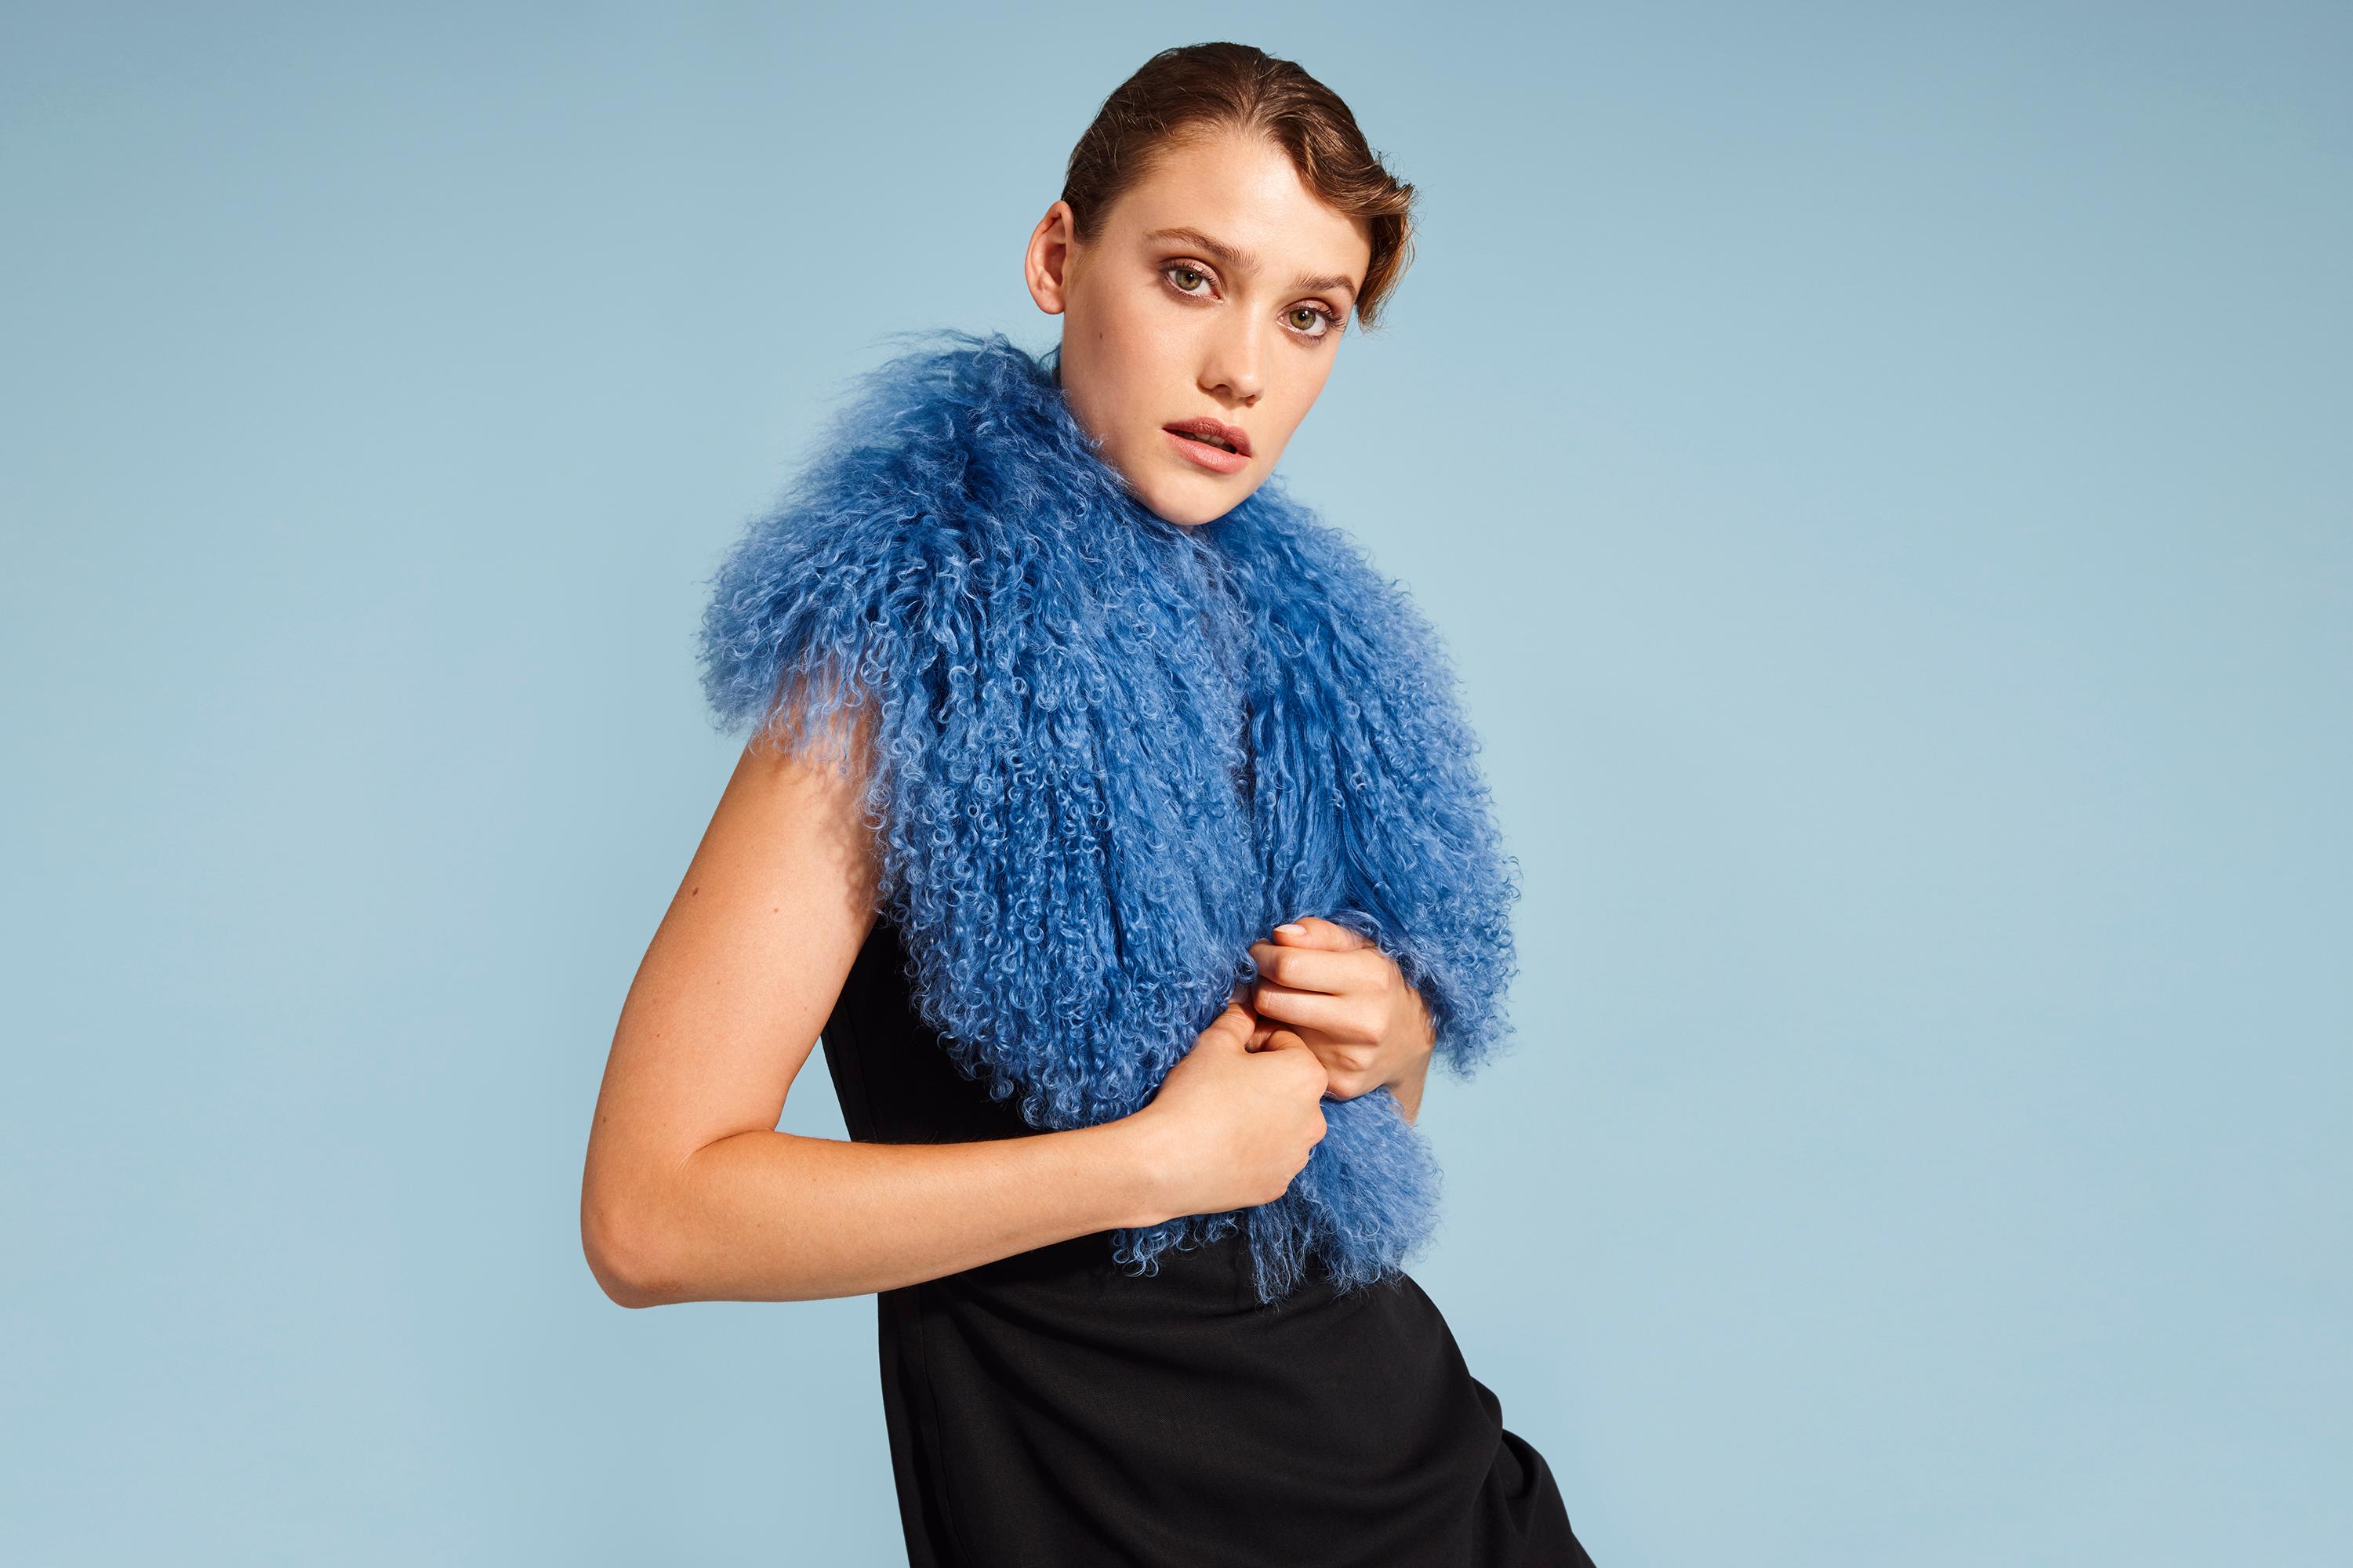 Verheyen London Shawl Collar in Blue Topaz Mongolian Lamb Fur lined in silk new

The Shawl Collar is Verheyen London’s casual everyday design, which is perfectly shaped to wear over any outfit.  Designed for layering, this structured shape, crafted